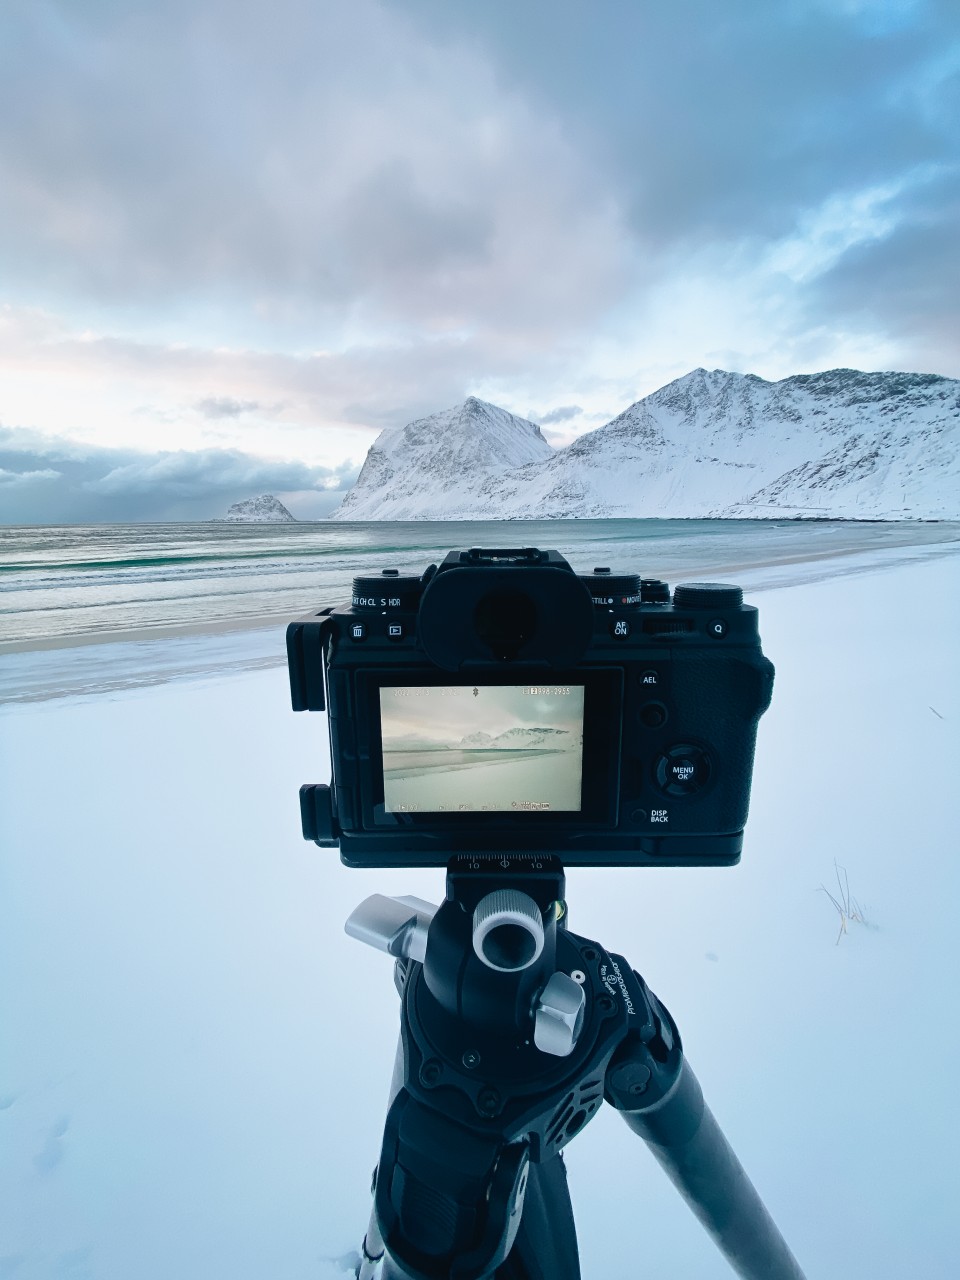  Camera and tripod in front of a snowy coastline